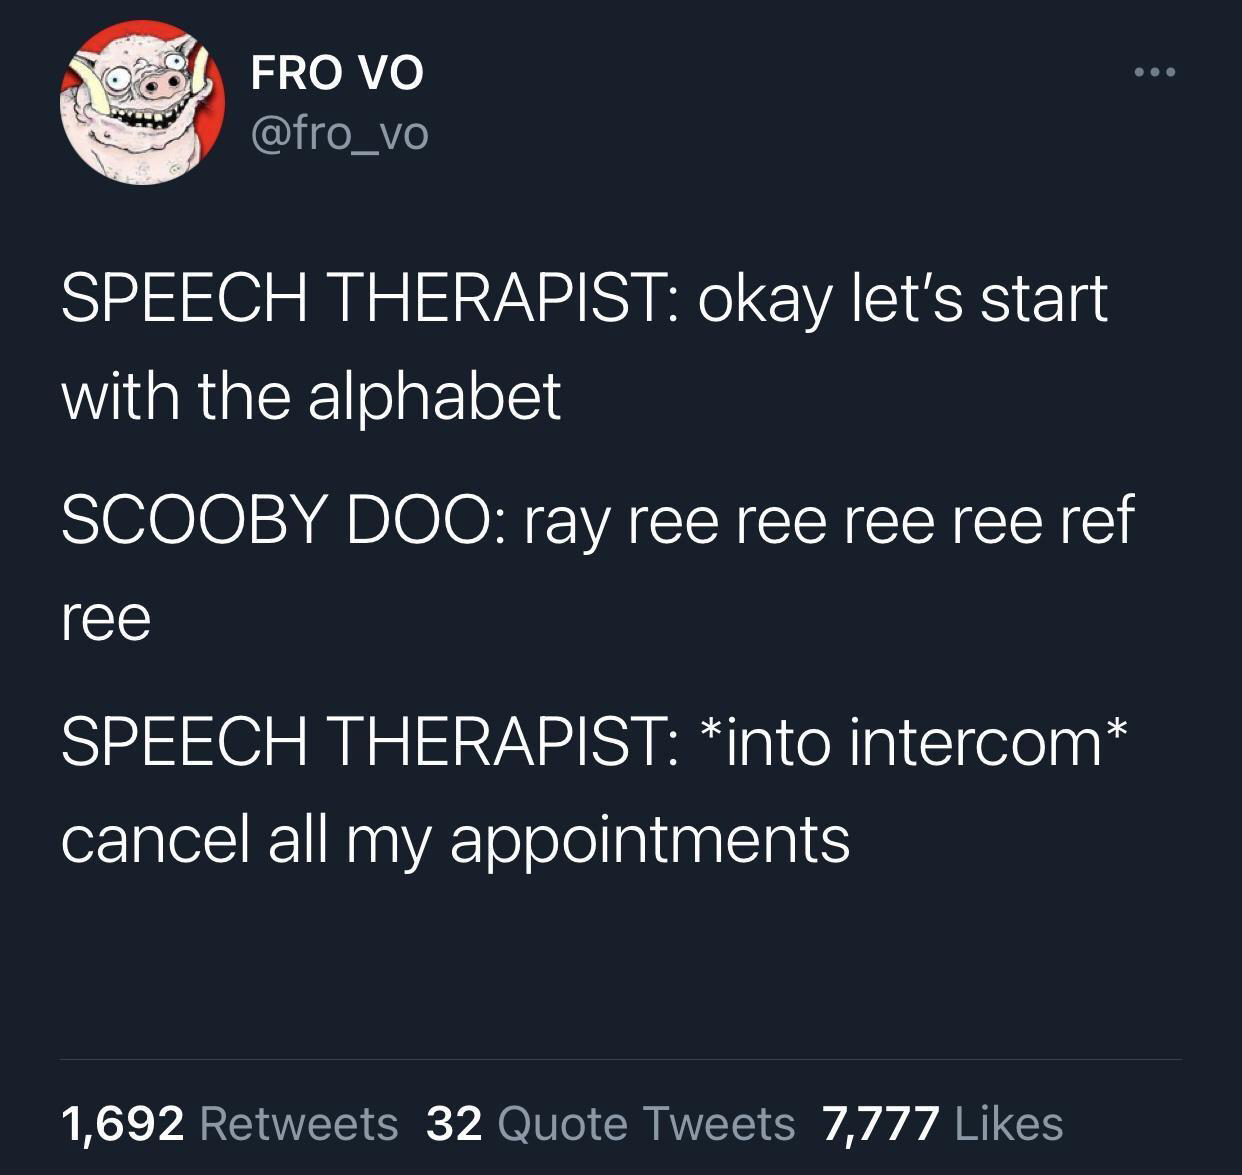 twitter memes - funny tweets atmosphere - @ @ Fro Vo Speech Therapist okay let's start with the alphabet Scooby Doo ray ree ree ree ree ref ree Speech Therapist into intercom cancel all my appointments 1,692 32 Quote Tweets 7,777